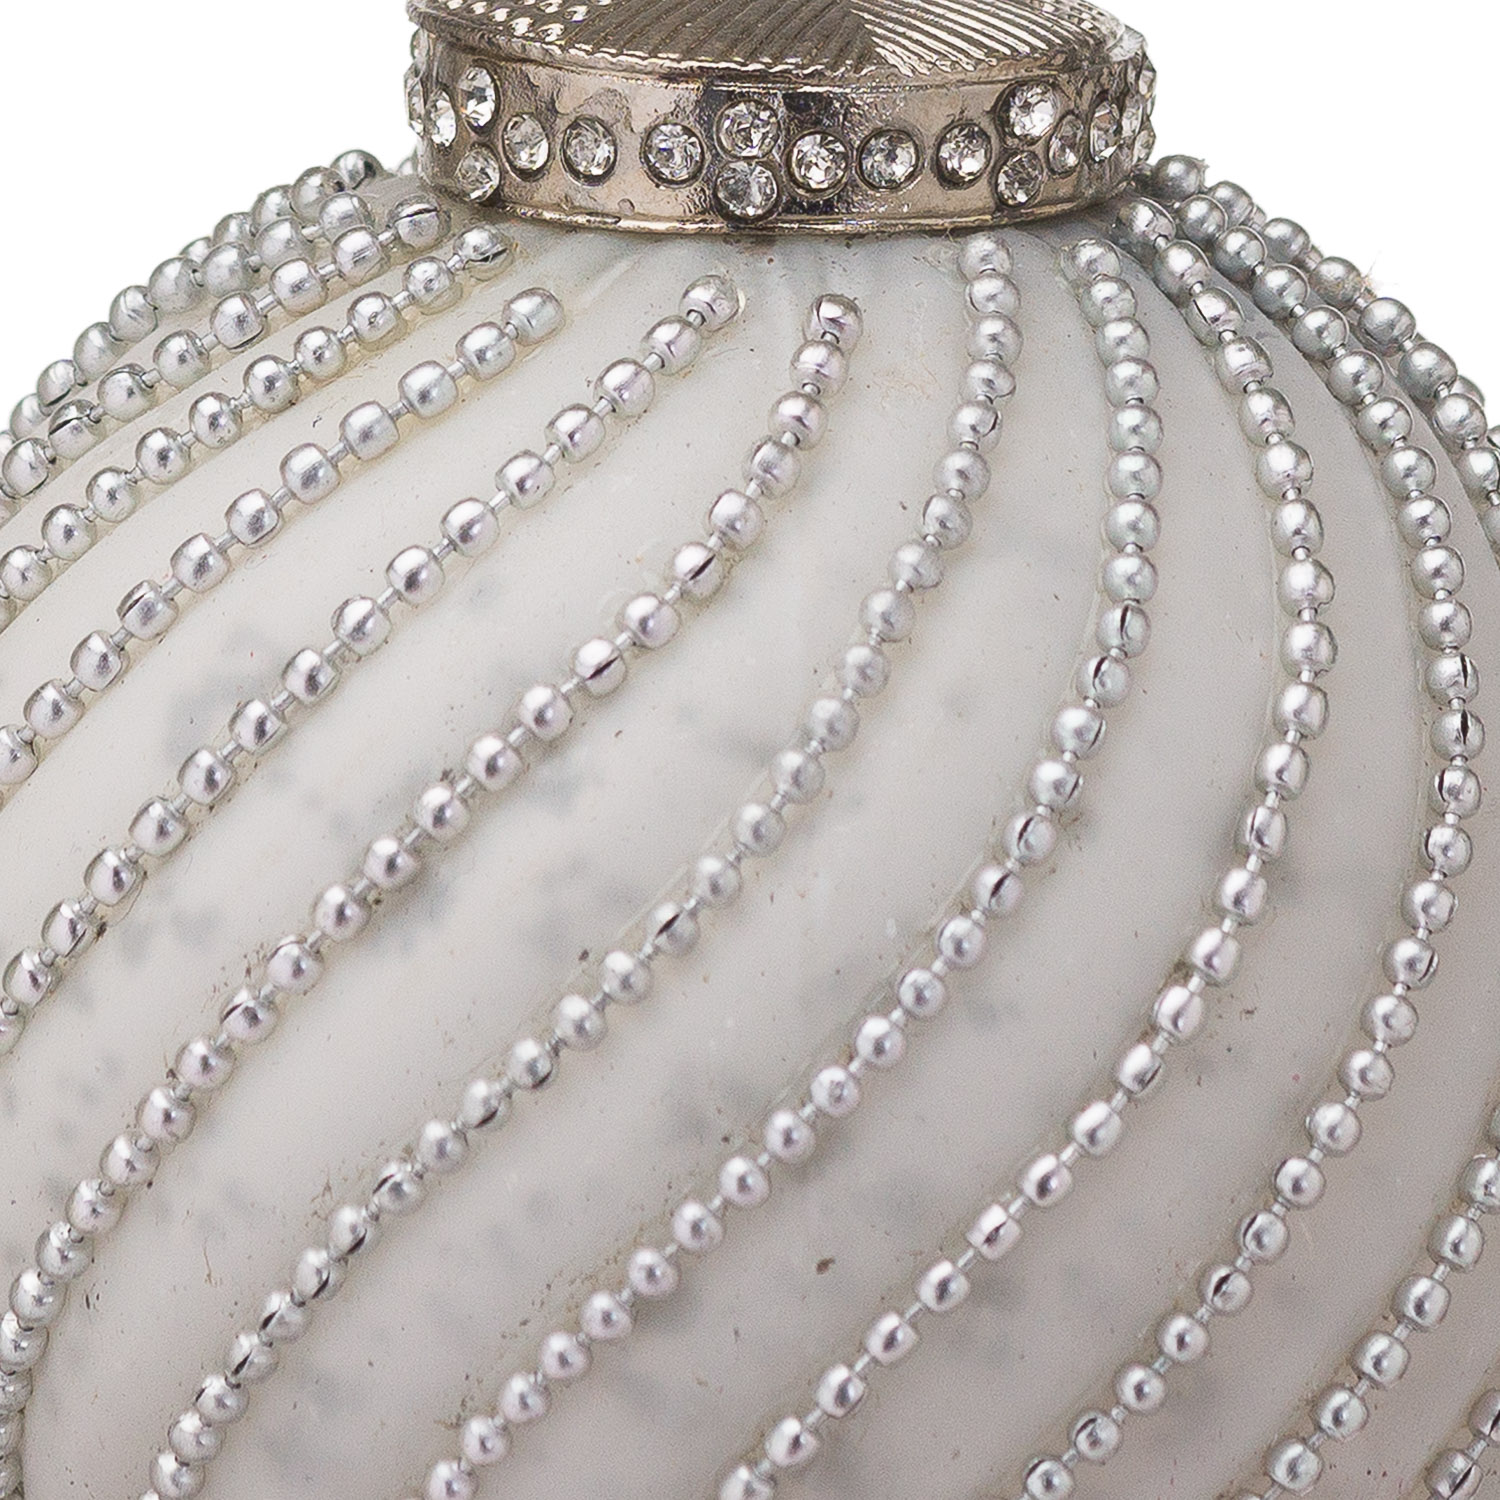 The Noel Collection White Jewel Swirl Large Bauble - Image 2